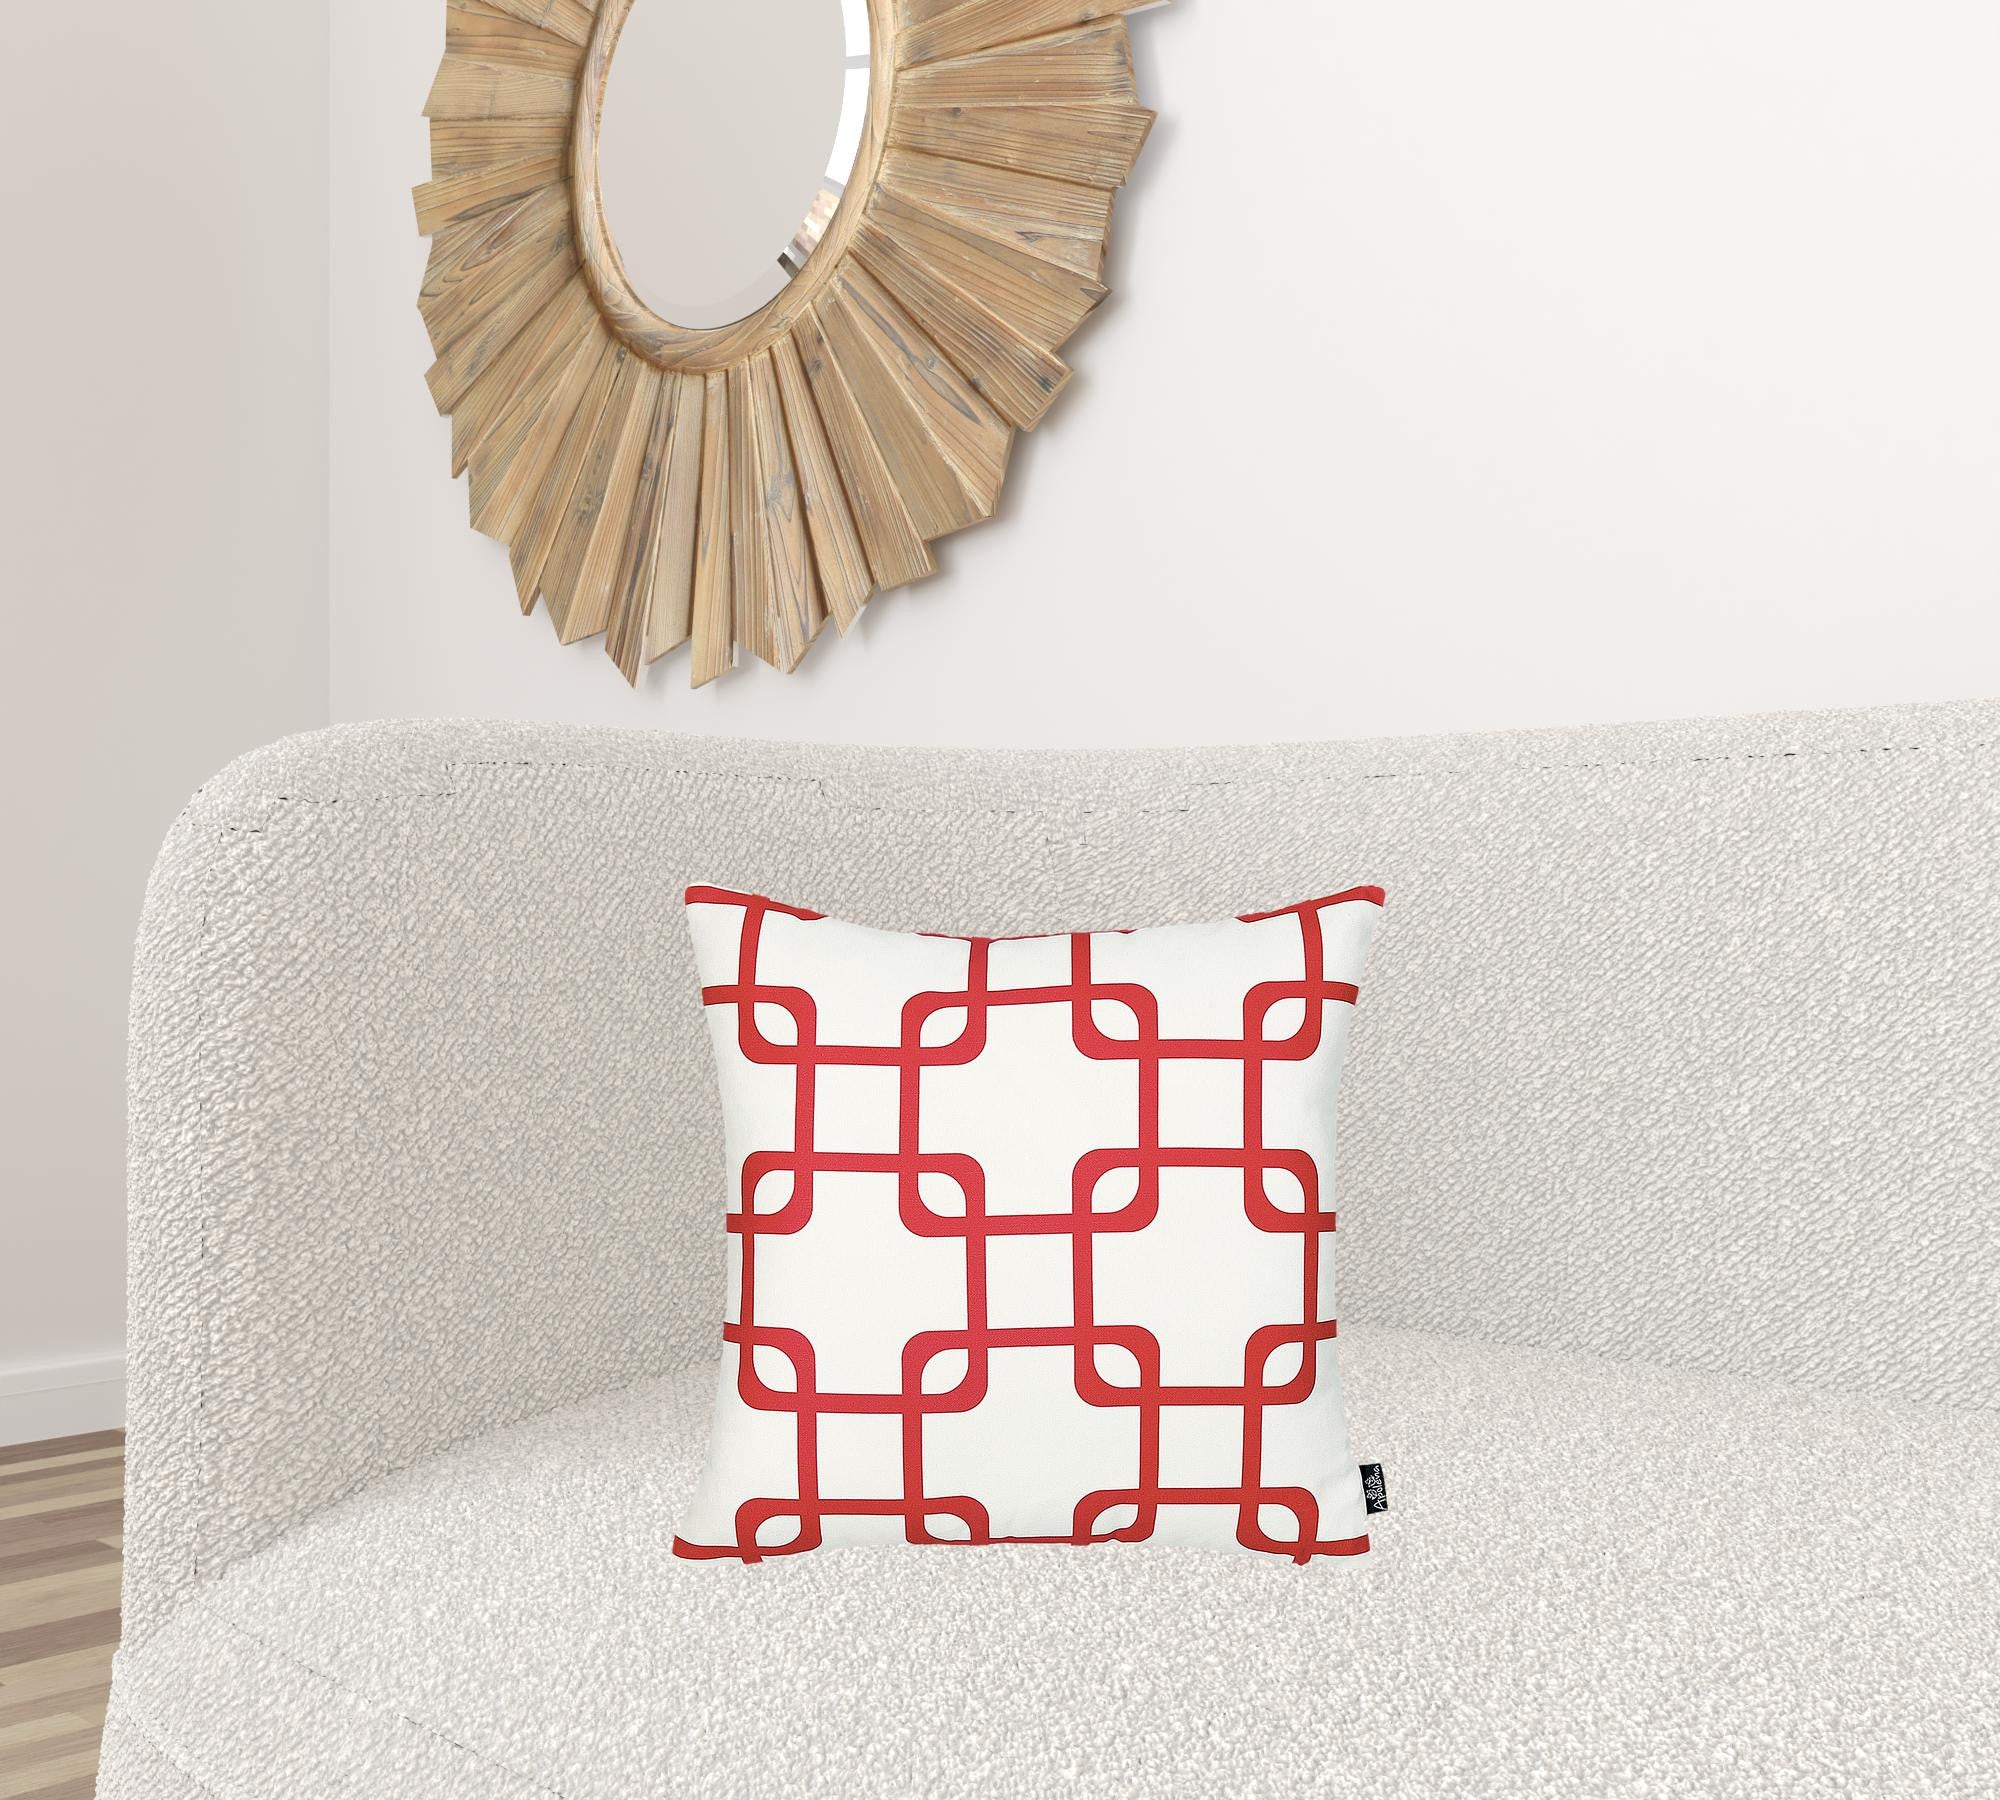 Red And White Geometric Squares Decorative Throw Pillow Cover